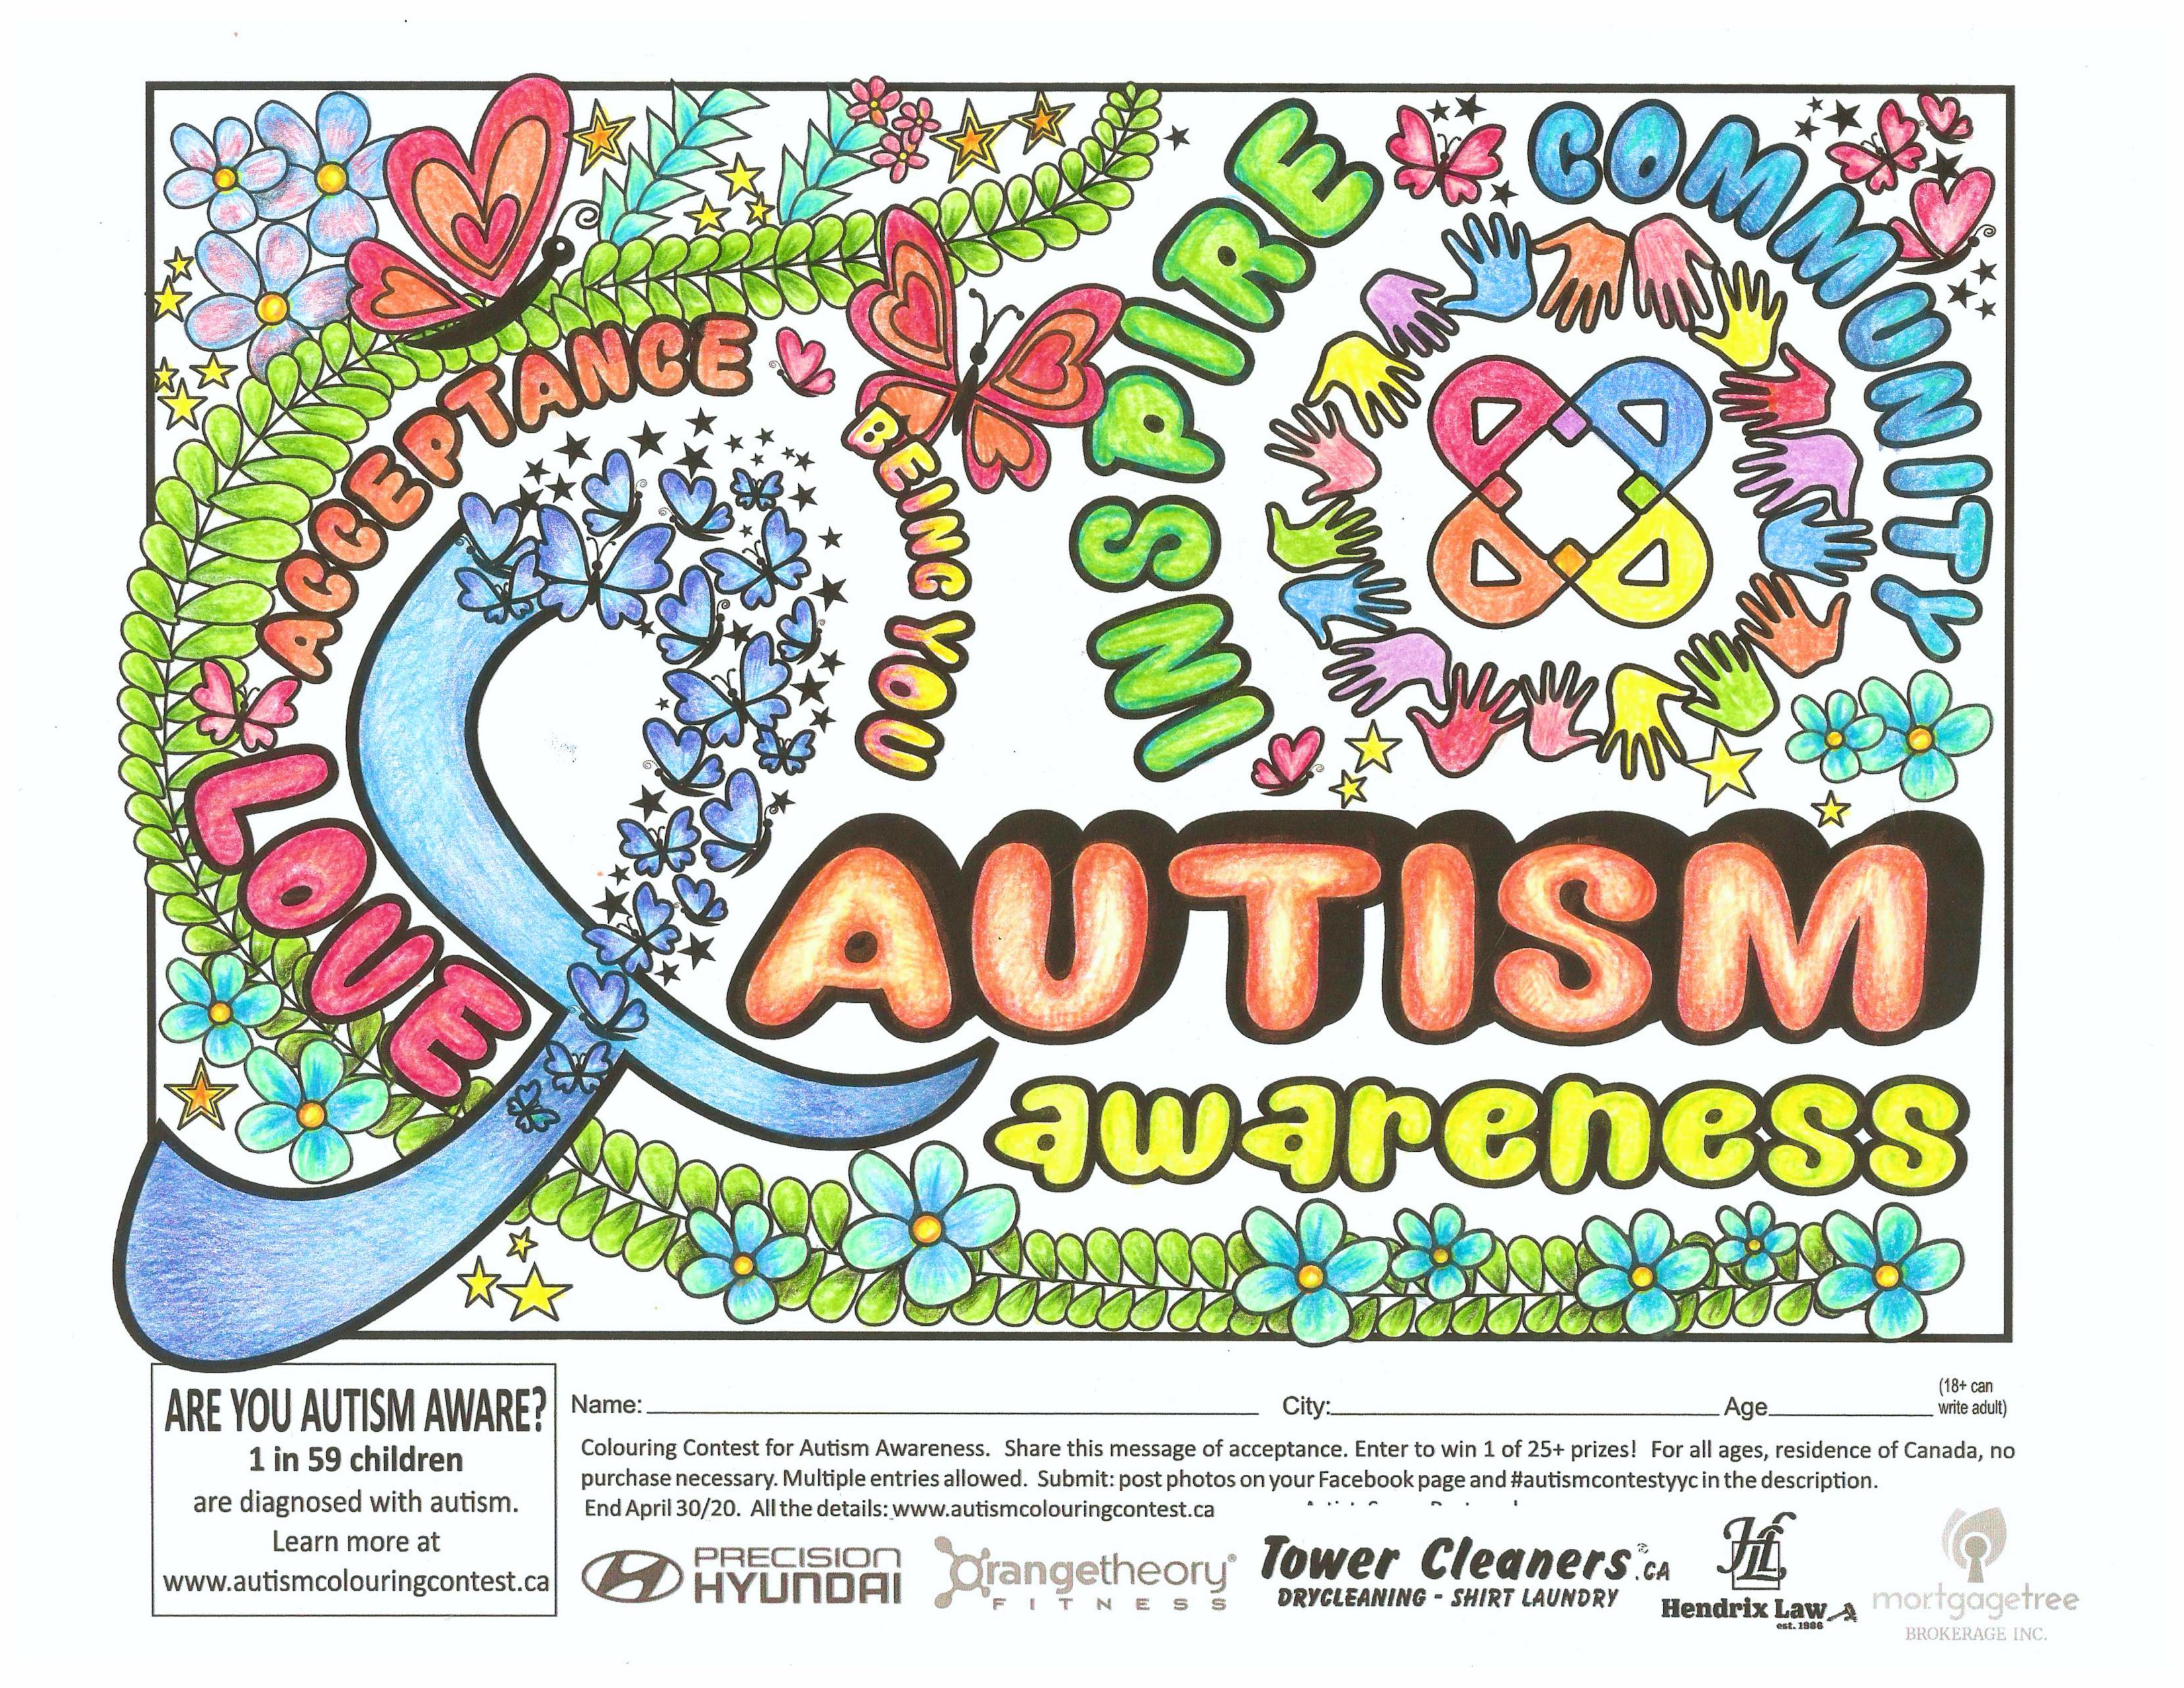 Welcome to the 2020 Autism Awareness Colouring Contest! - Mortgage Tree